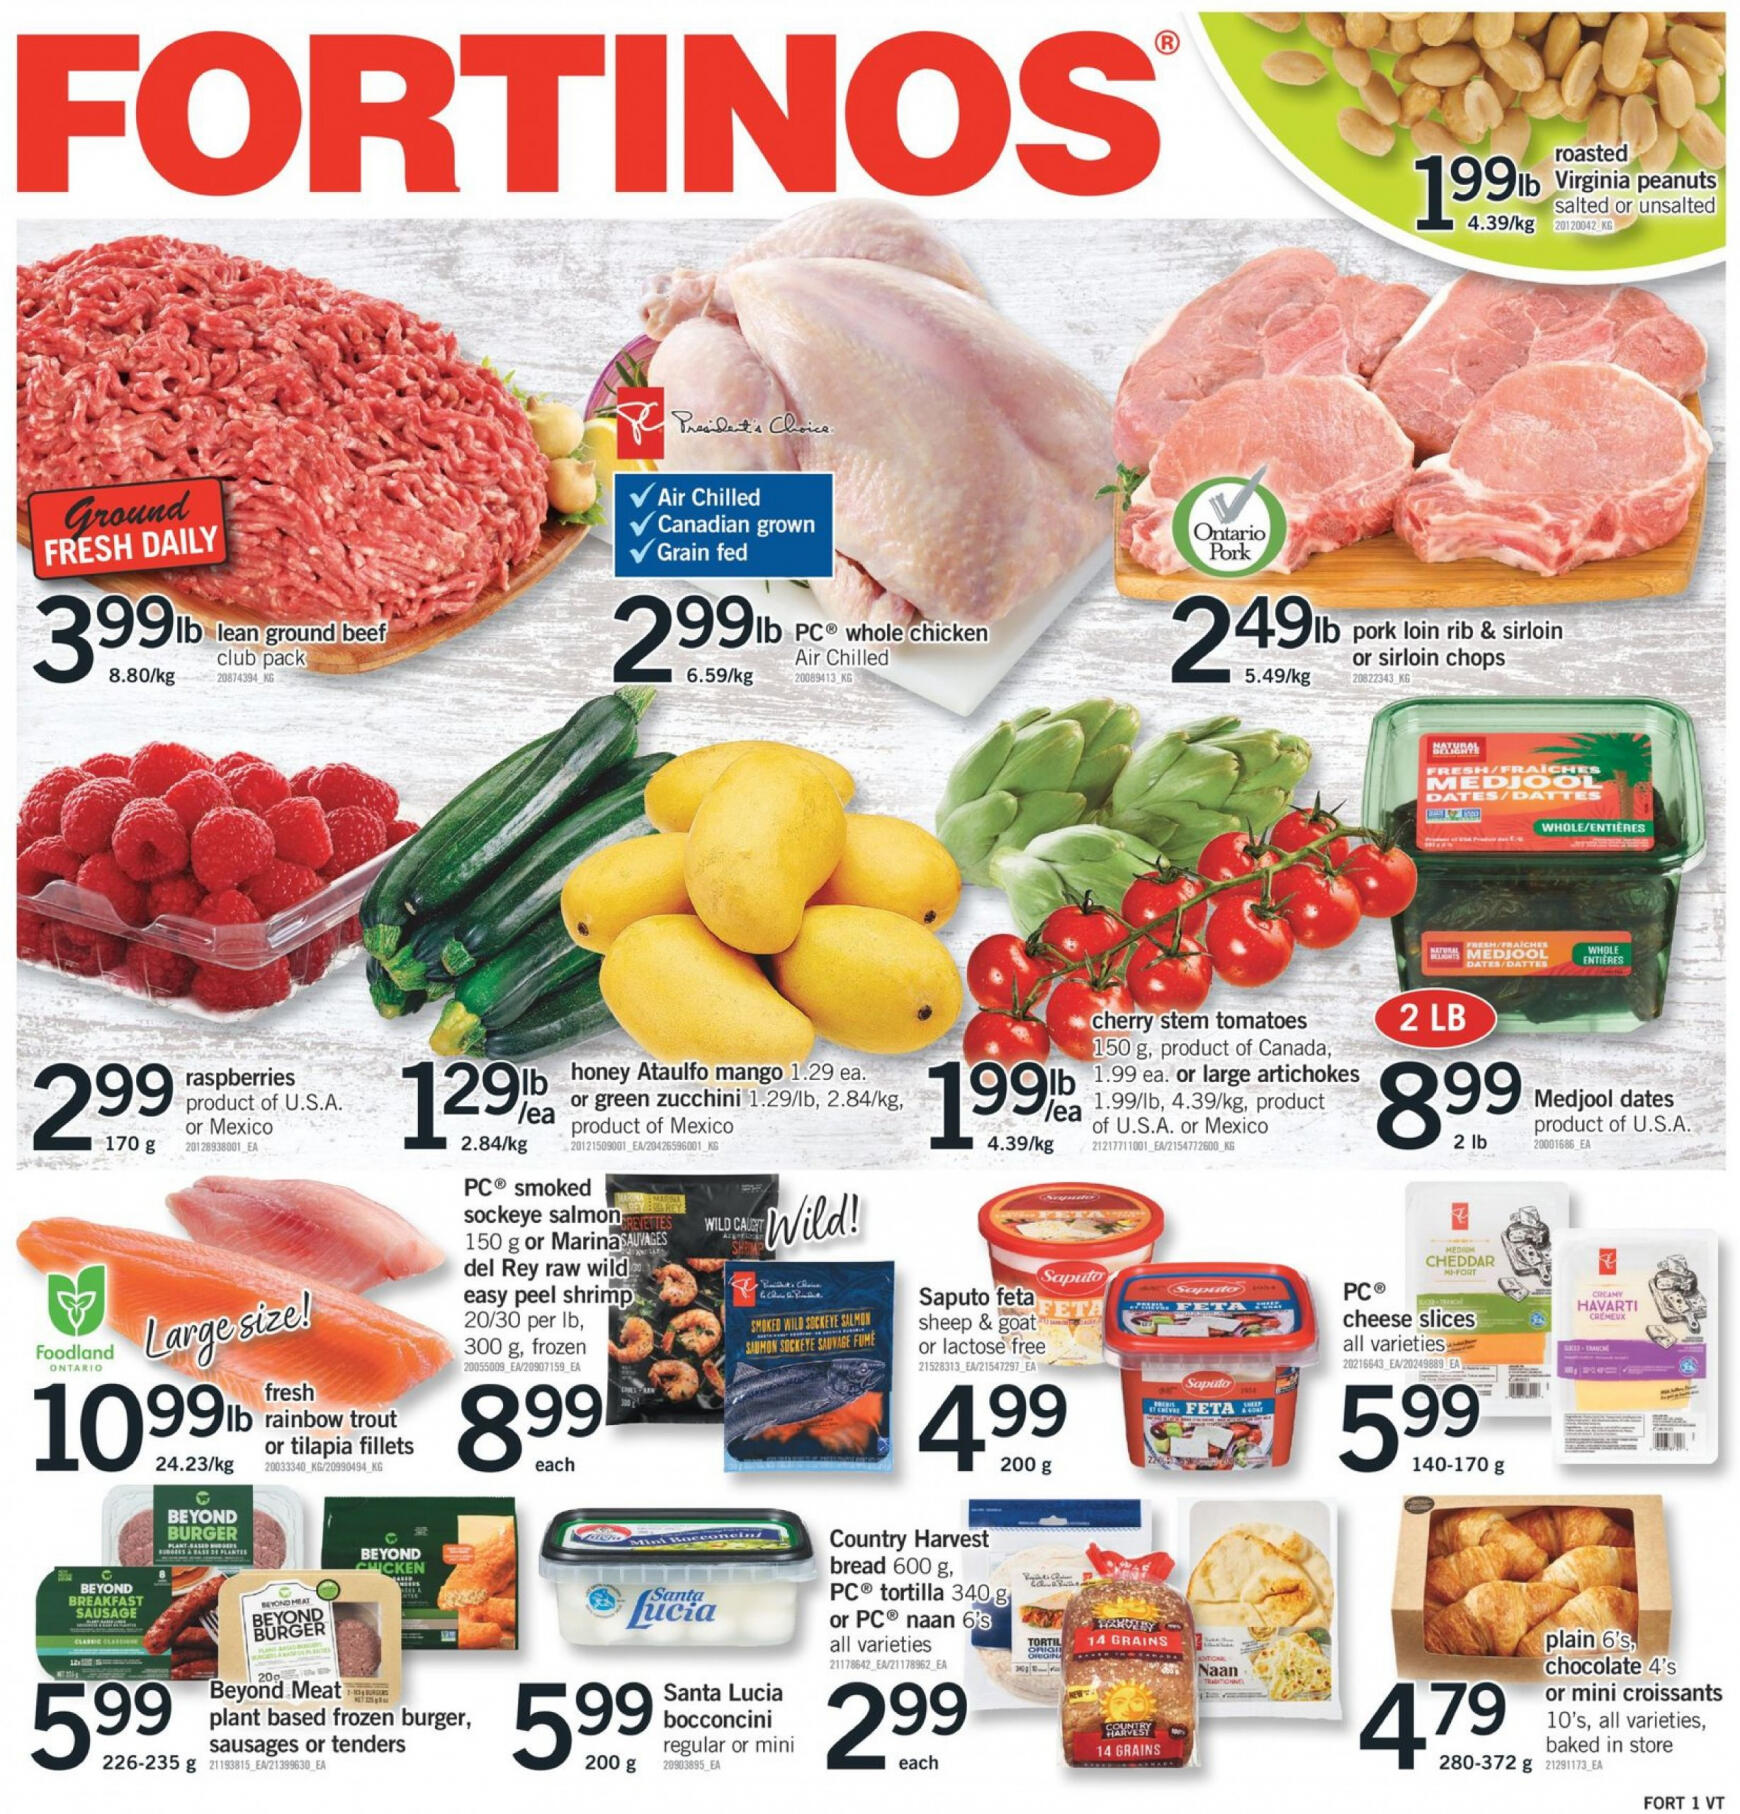 fortinos - Fortinos flyer current 04.04. - 10.04. - page: 1